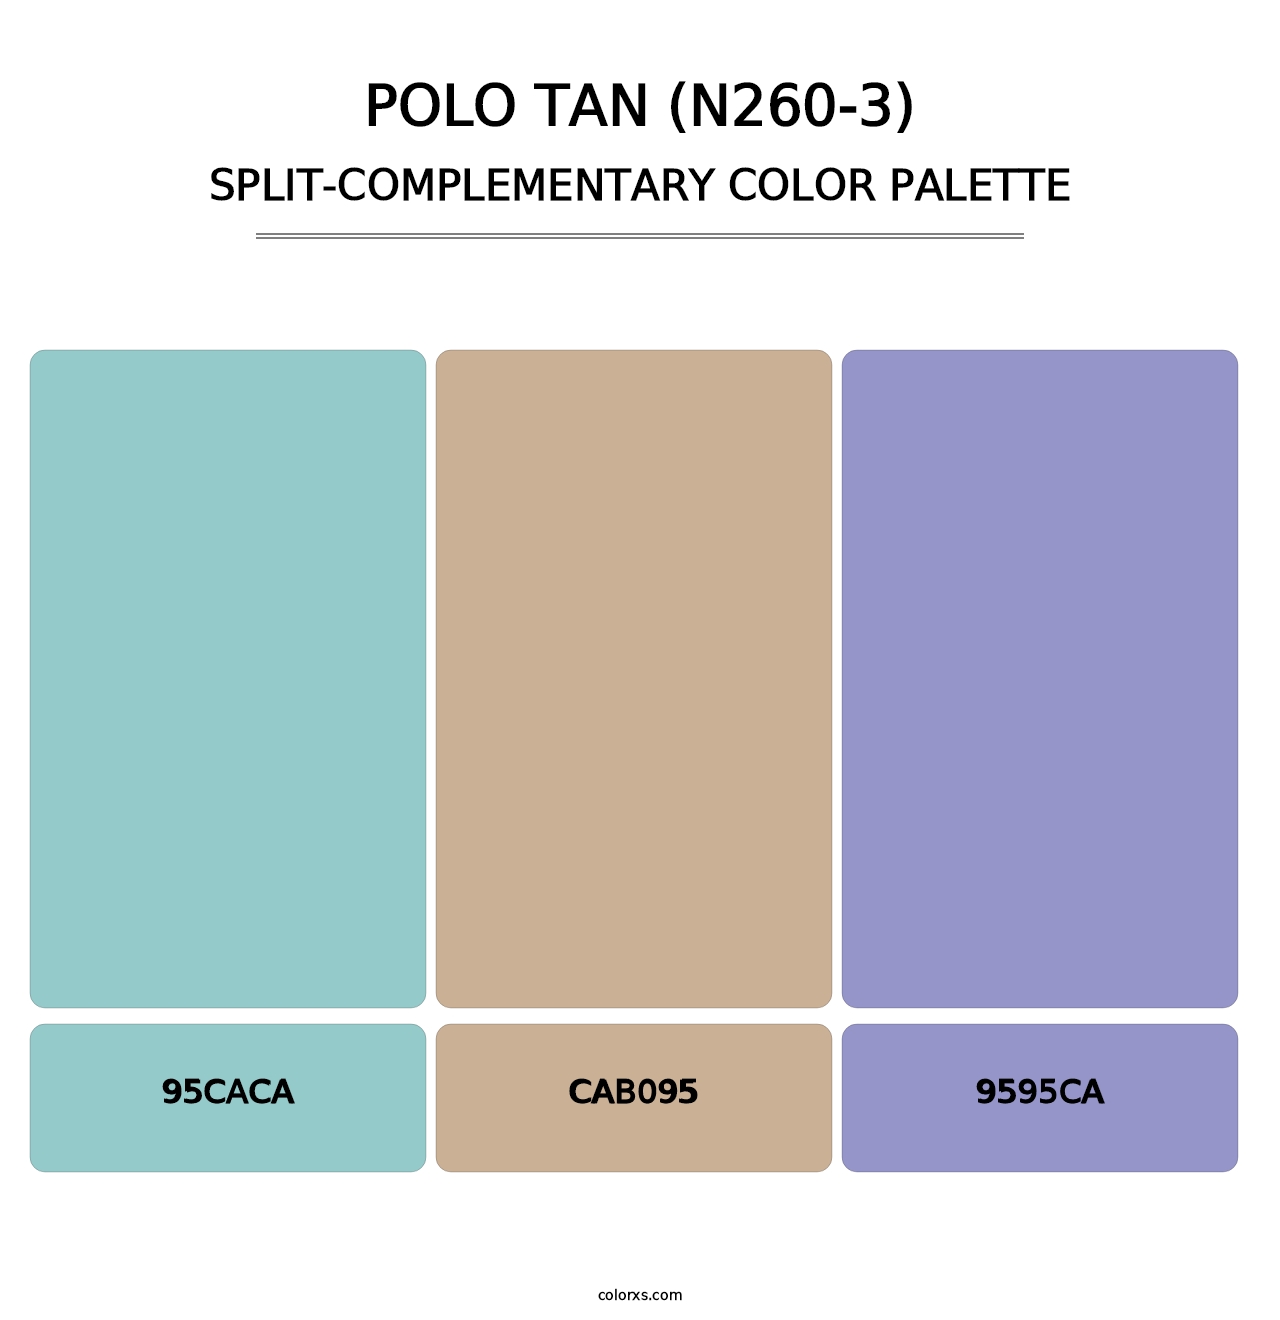 Polo Tan (N260-3) - Split-Complementary Color Palette